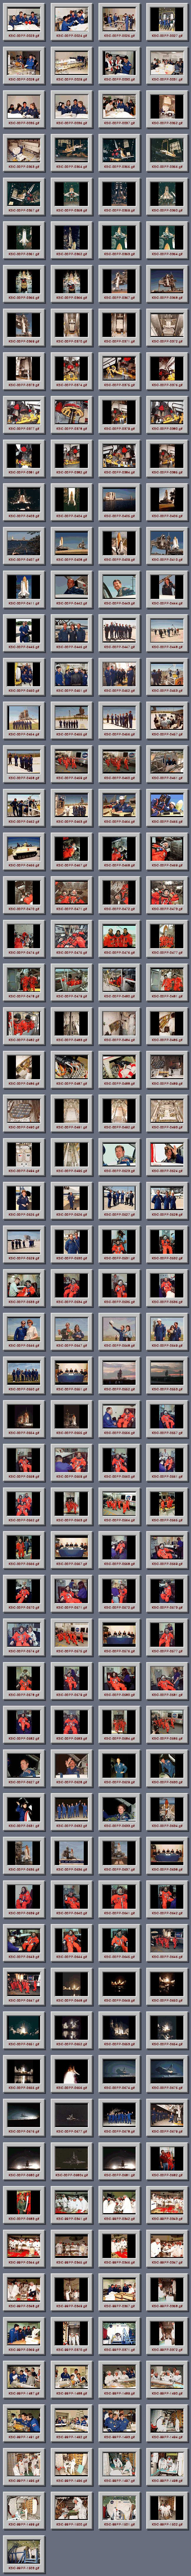 [STS-101 Contact Sheet]